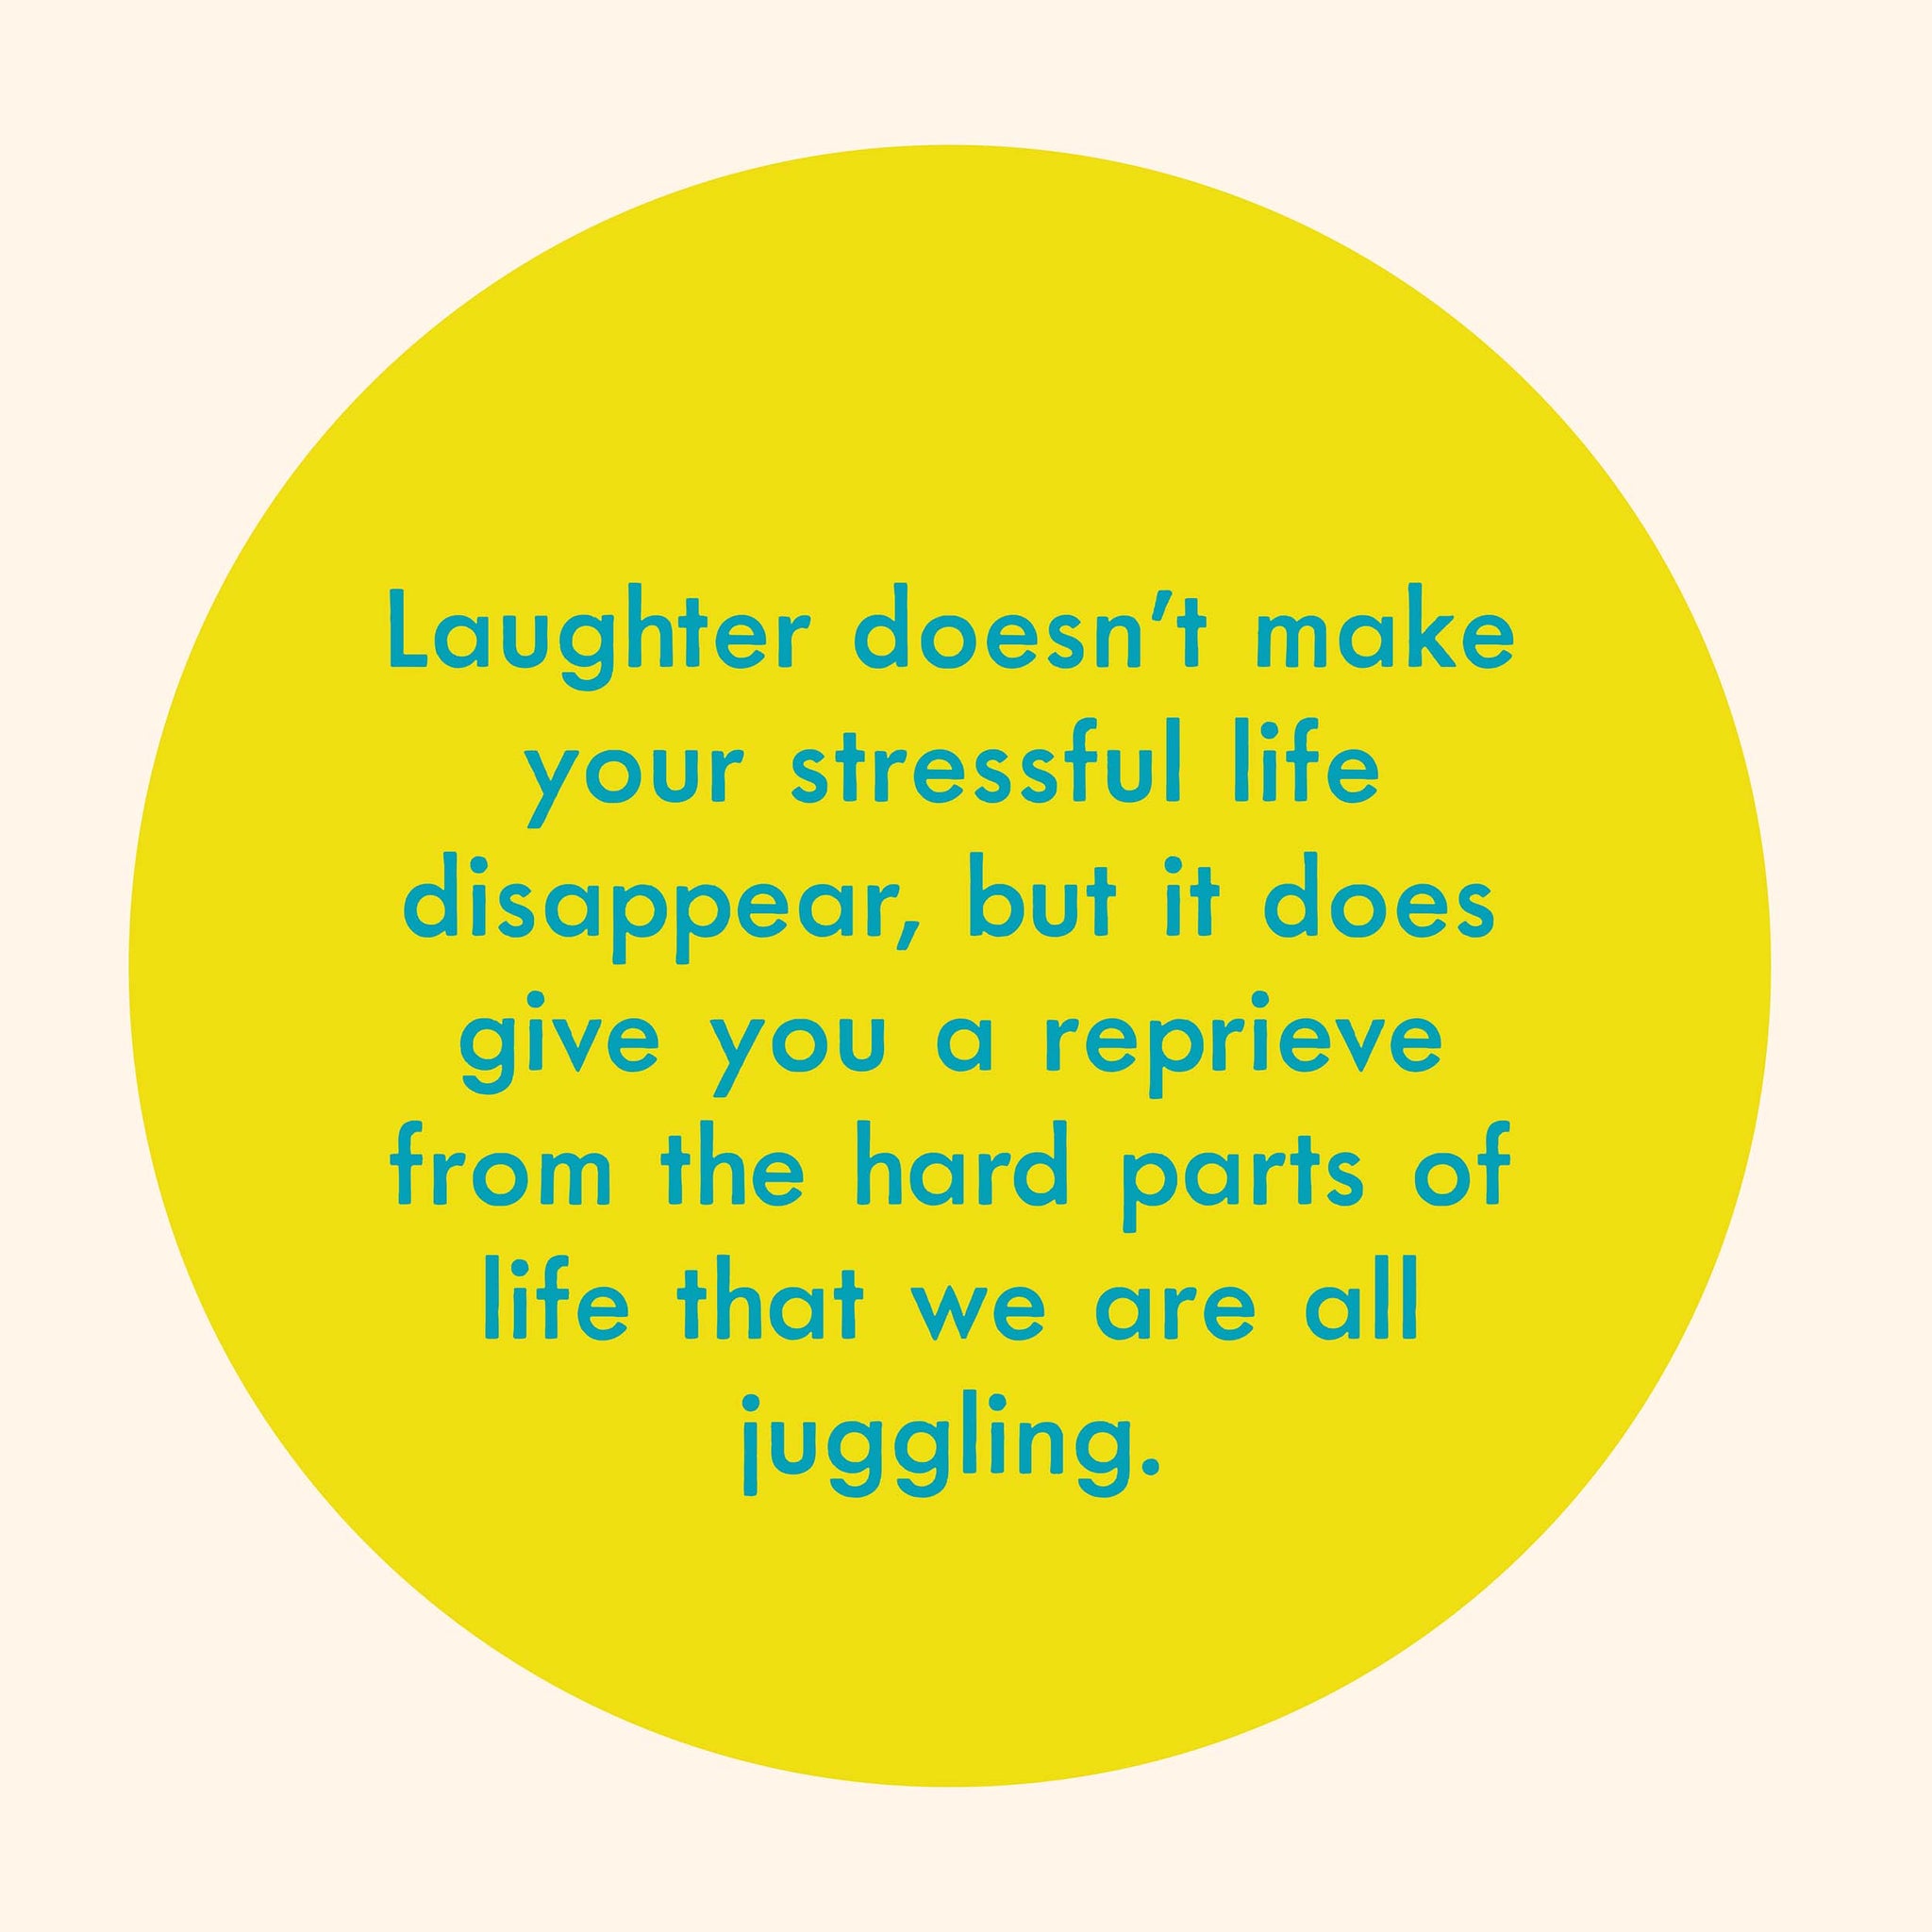 Laughter doesn’t make your stressful life disappear, but it does give you a reprieve from the hard parts of life that we are all juggling.